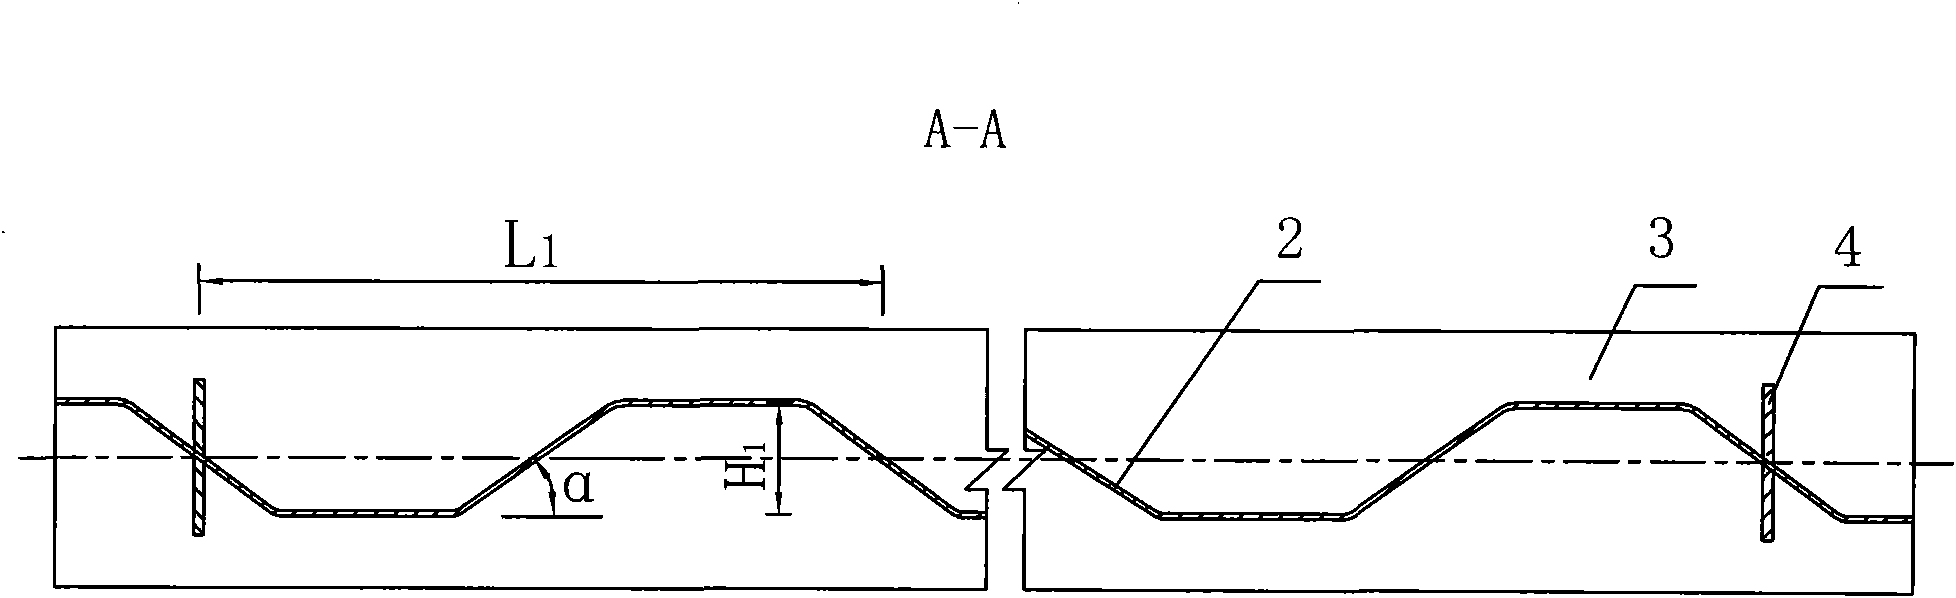 Steel pipe concrete flange combining beam with concrete fender